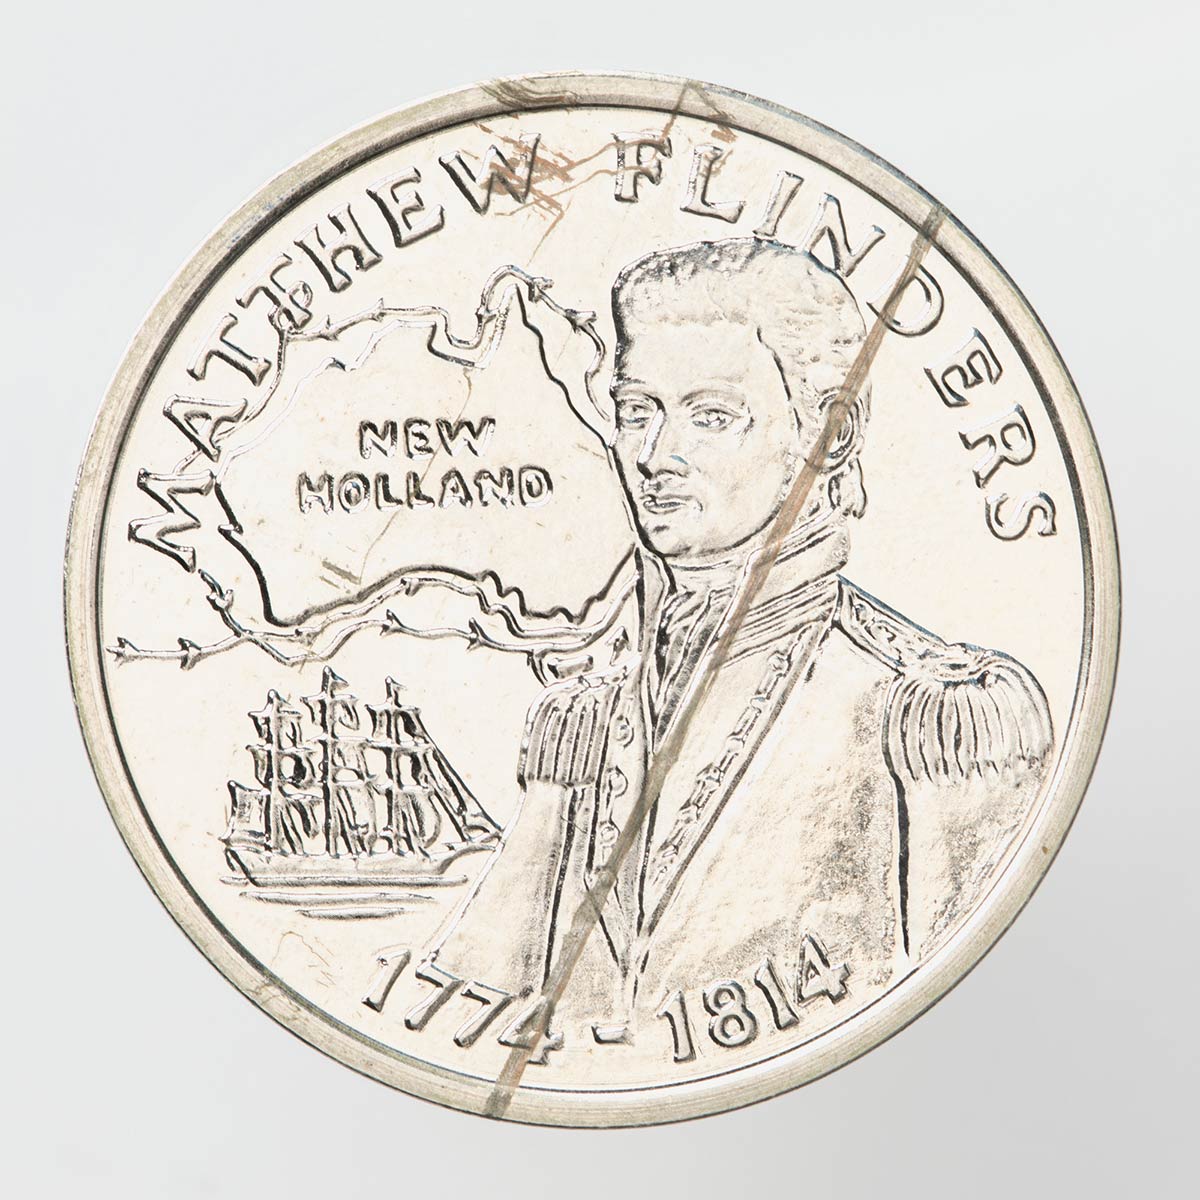 A silver coloured metal commemorative medal depicting Matthew Flinders. A map of Australia showing the routes of Flinders' voyage and an image of his Ship are also depicted. The dates "1774-1814" are inscribed beneath of image on the front.